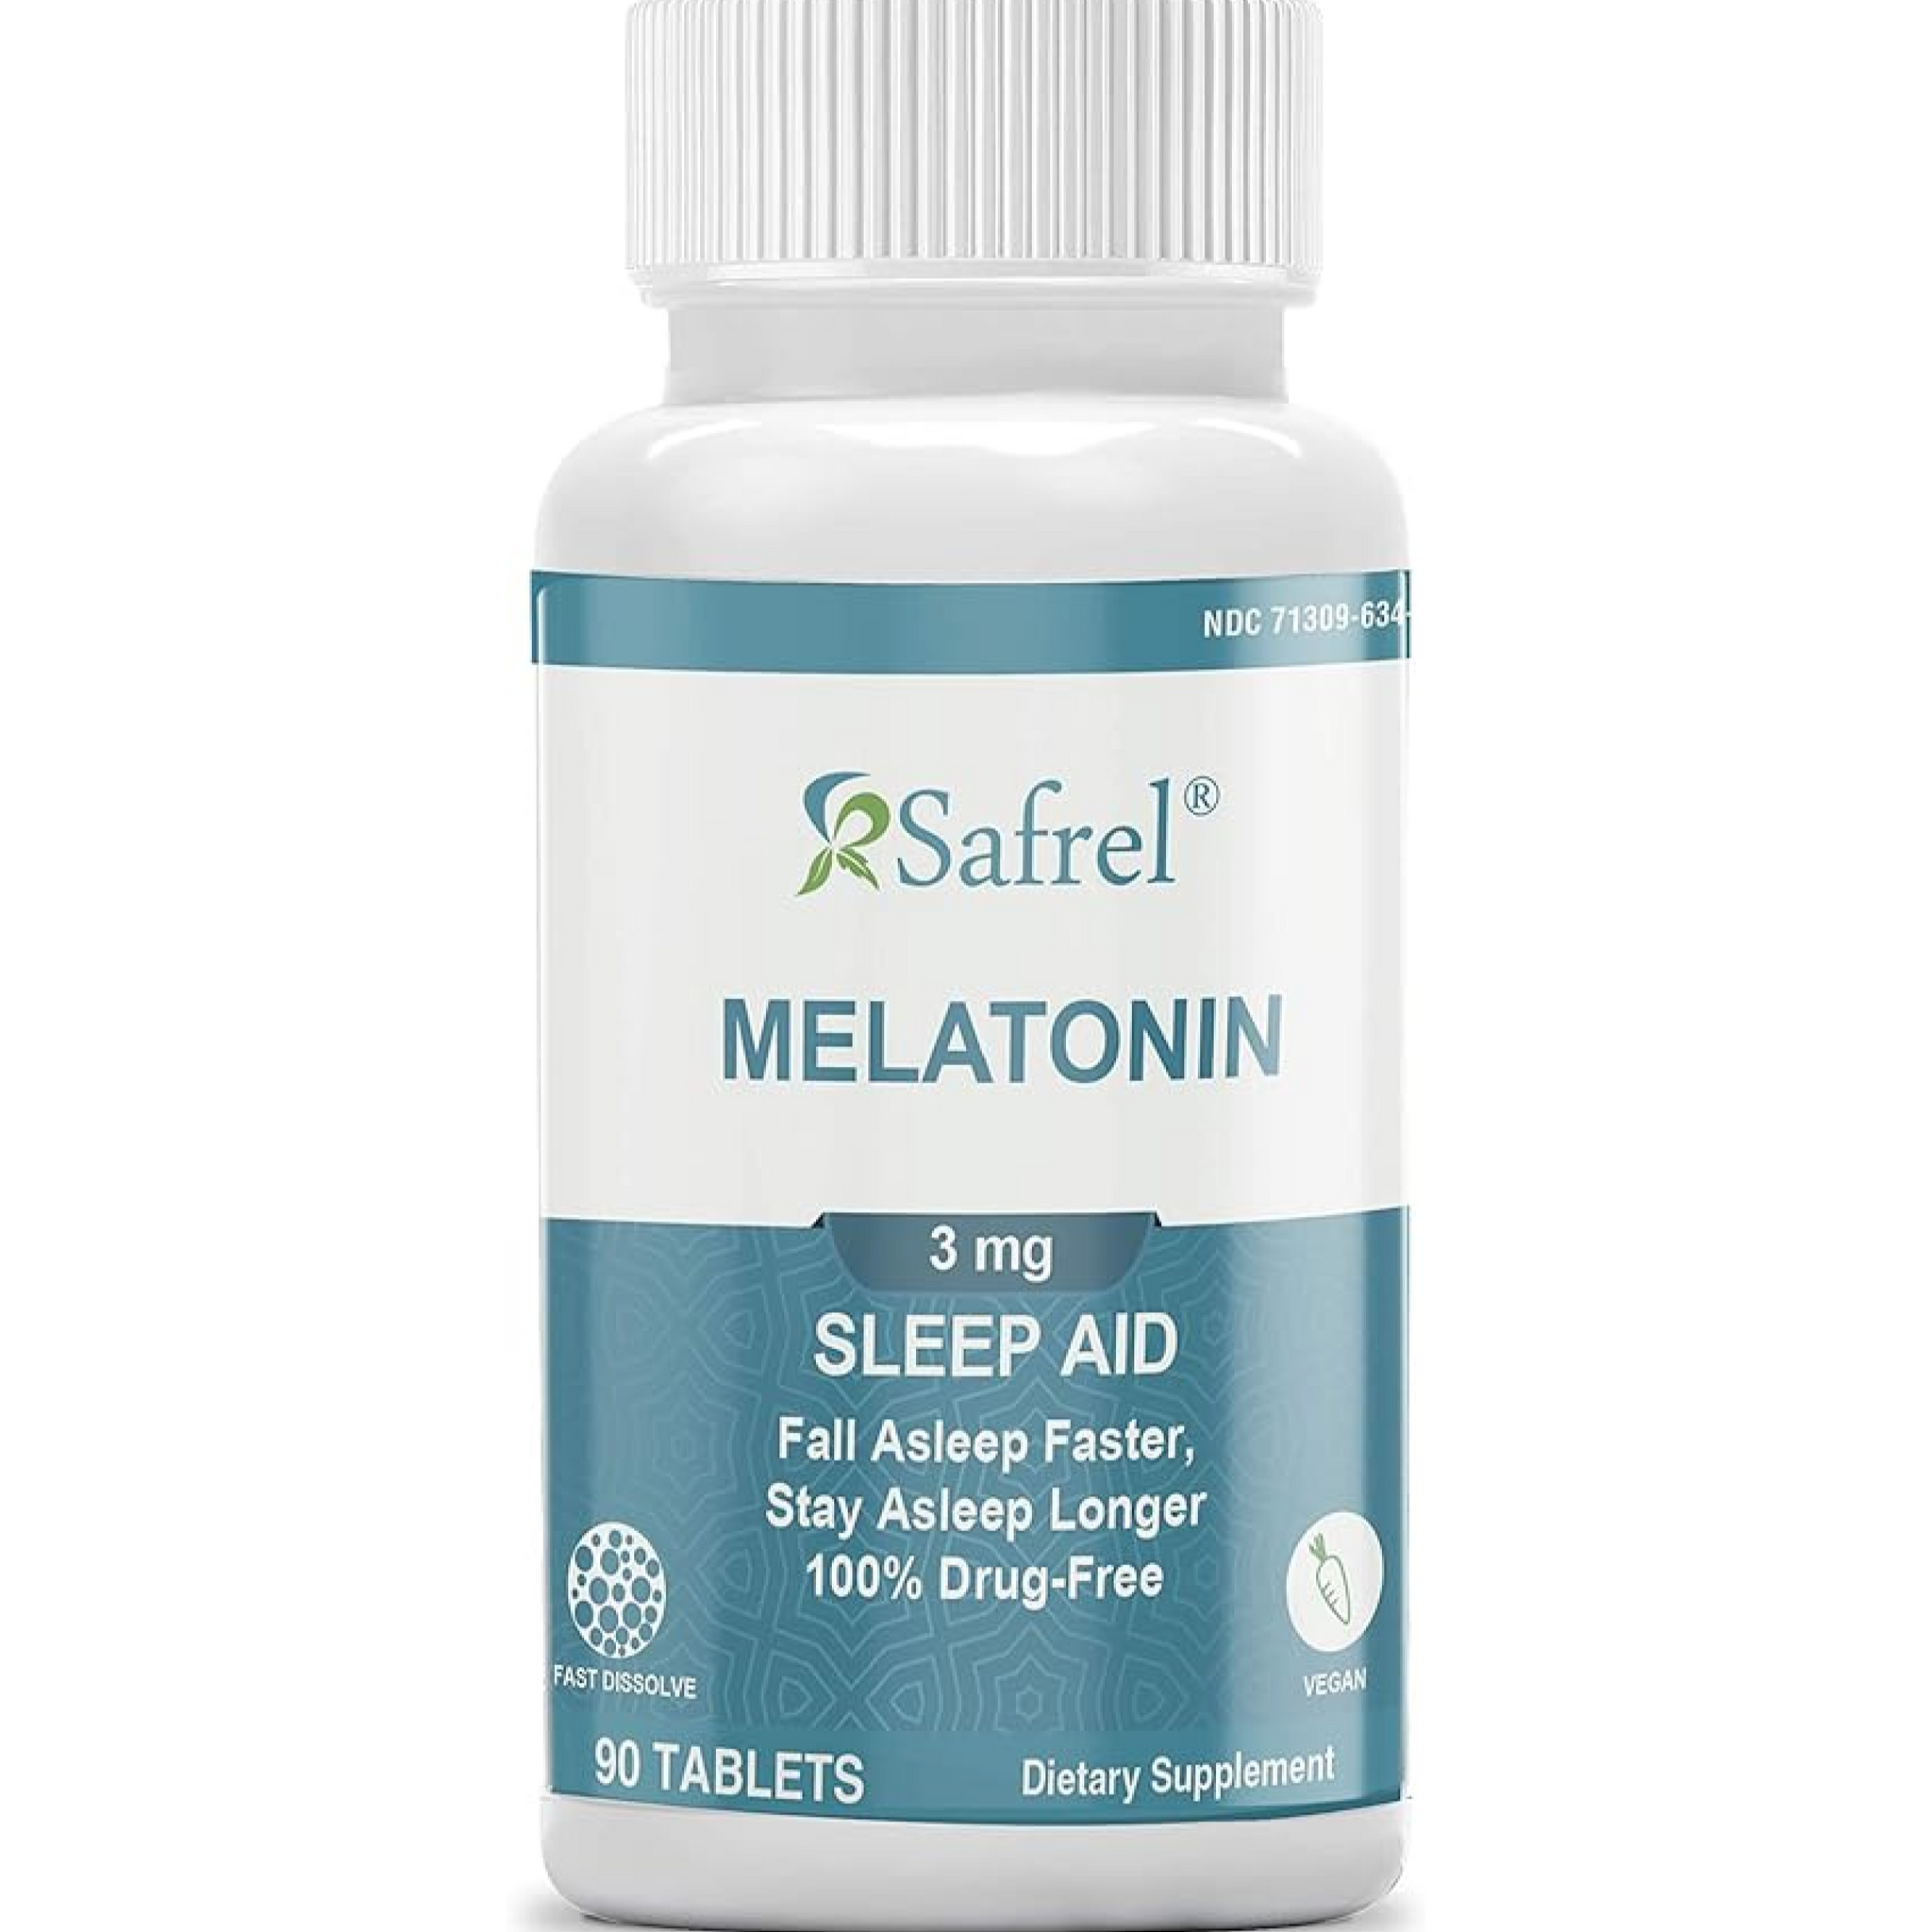 Safrel Melatonin 3mg Tablets, Vegan Natural Sleep Aid, Helps You to Fall Asleep Faster and Stay Asleep Longer, Helps with Occasional Sleeplessness and Supports Restful Sleep, 90 Count